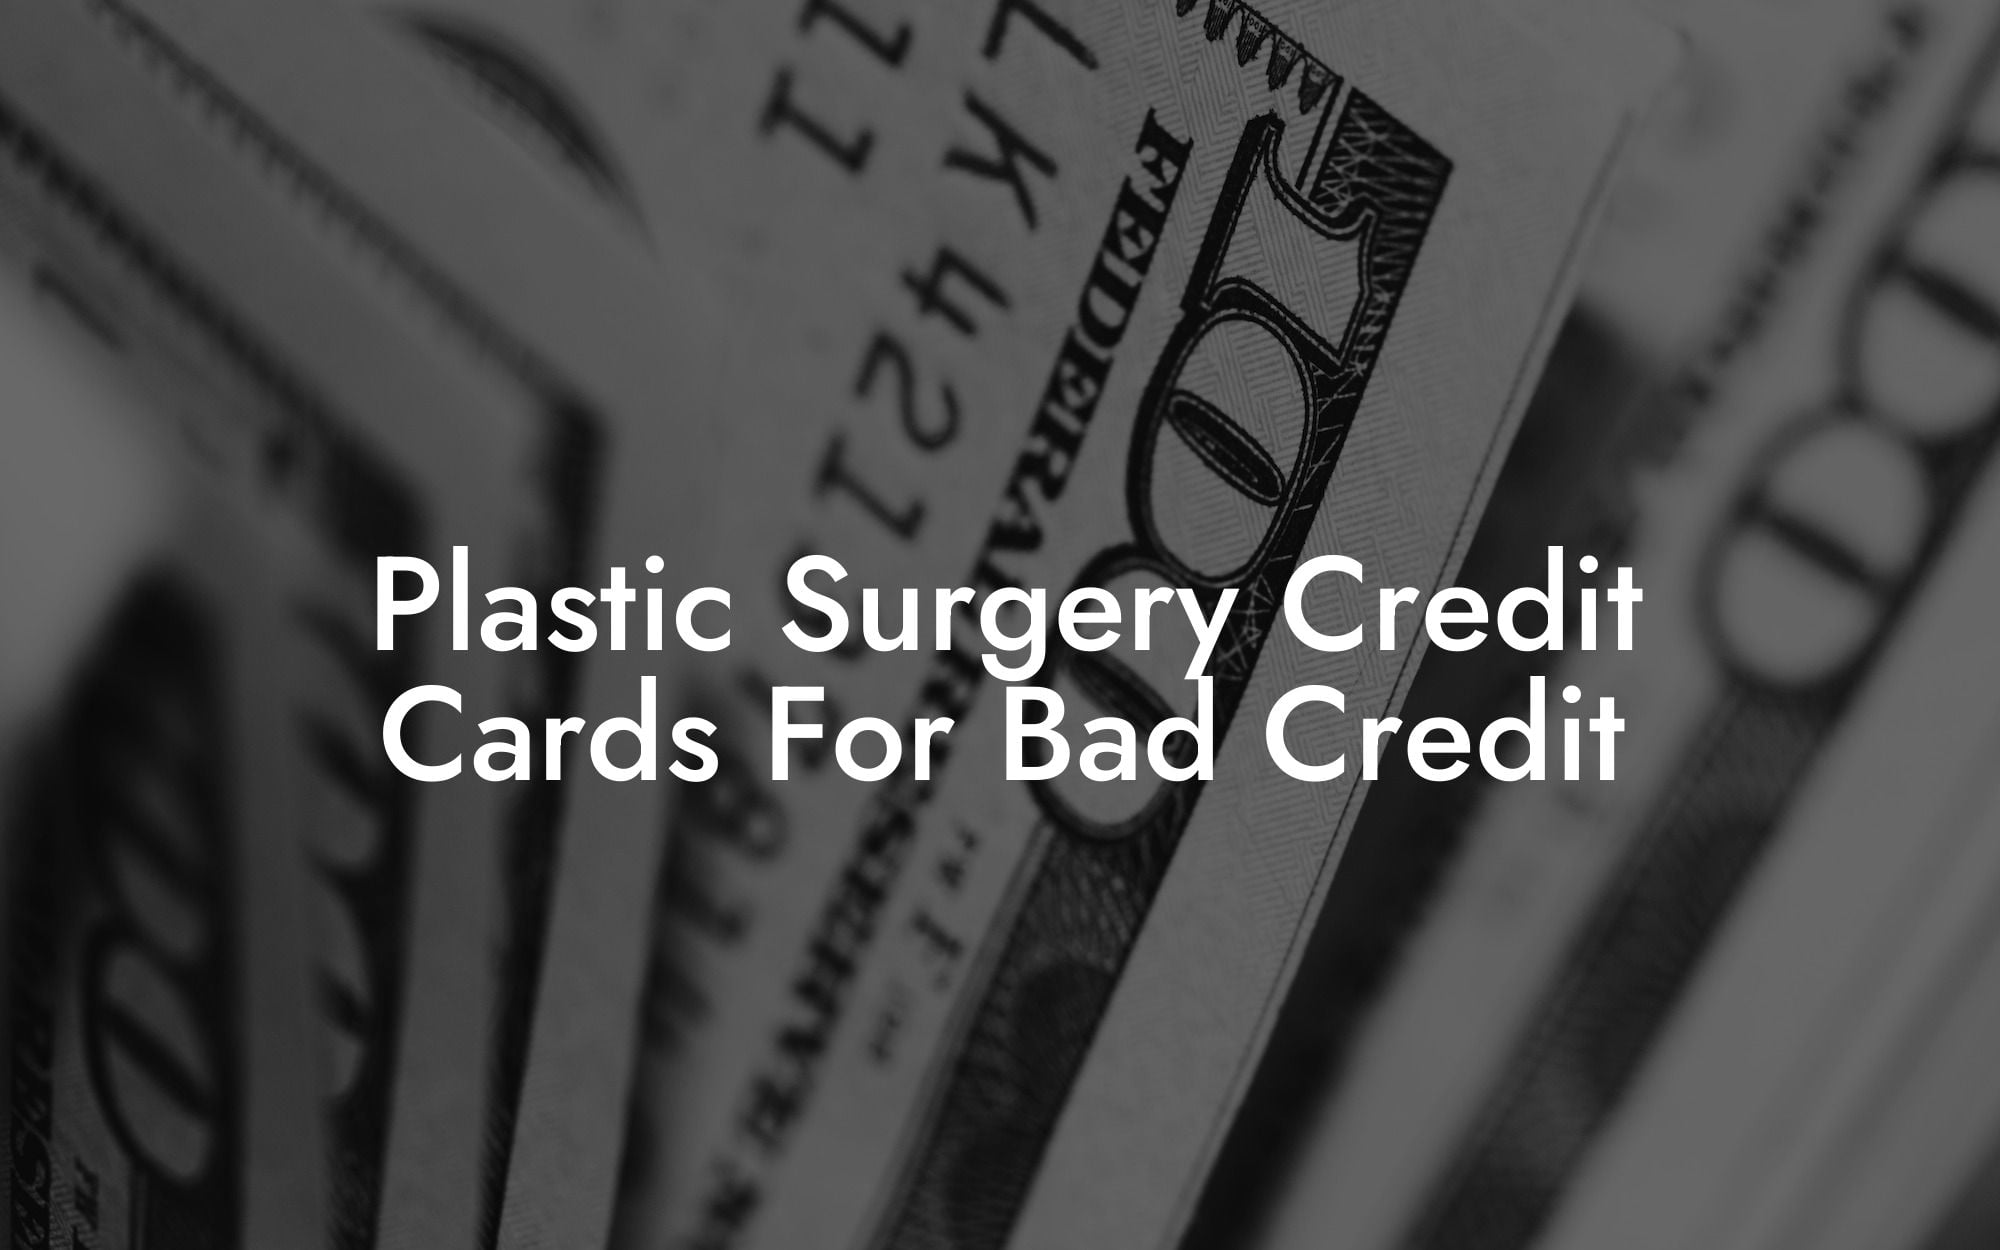 Plastic Surgery Credit Cards For Bad Credit